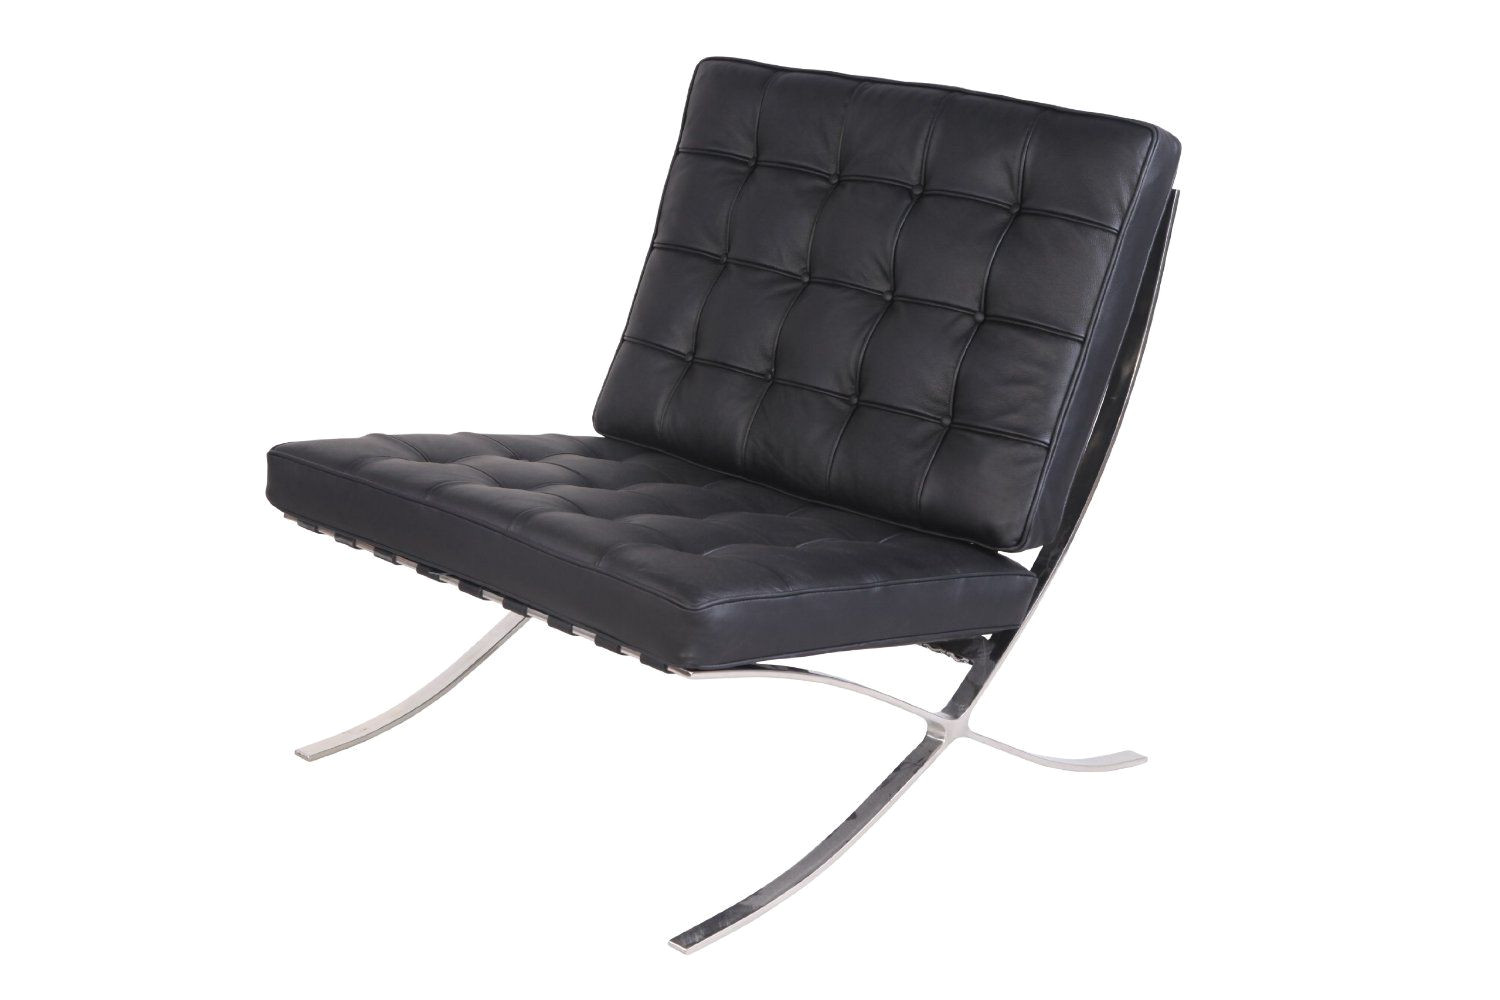 barcelona style chair inspired by ludwig mies van der rohe